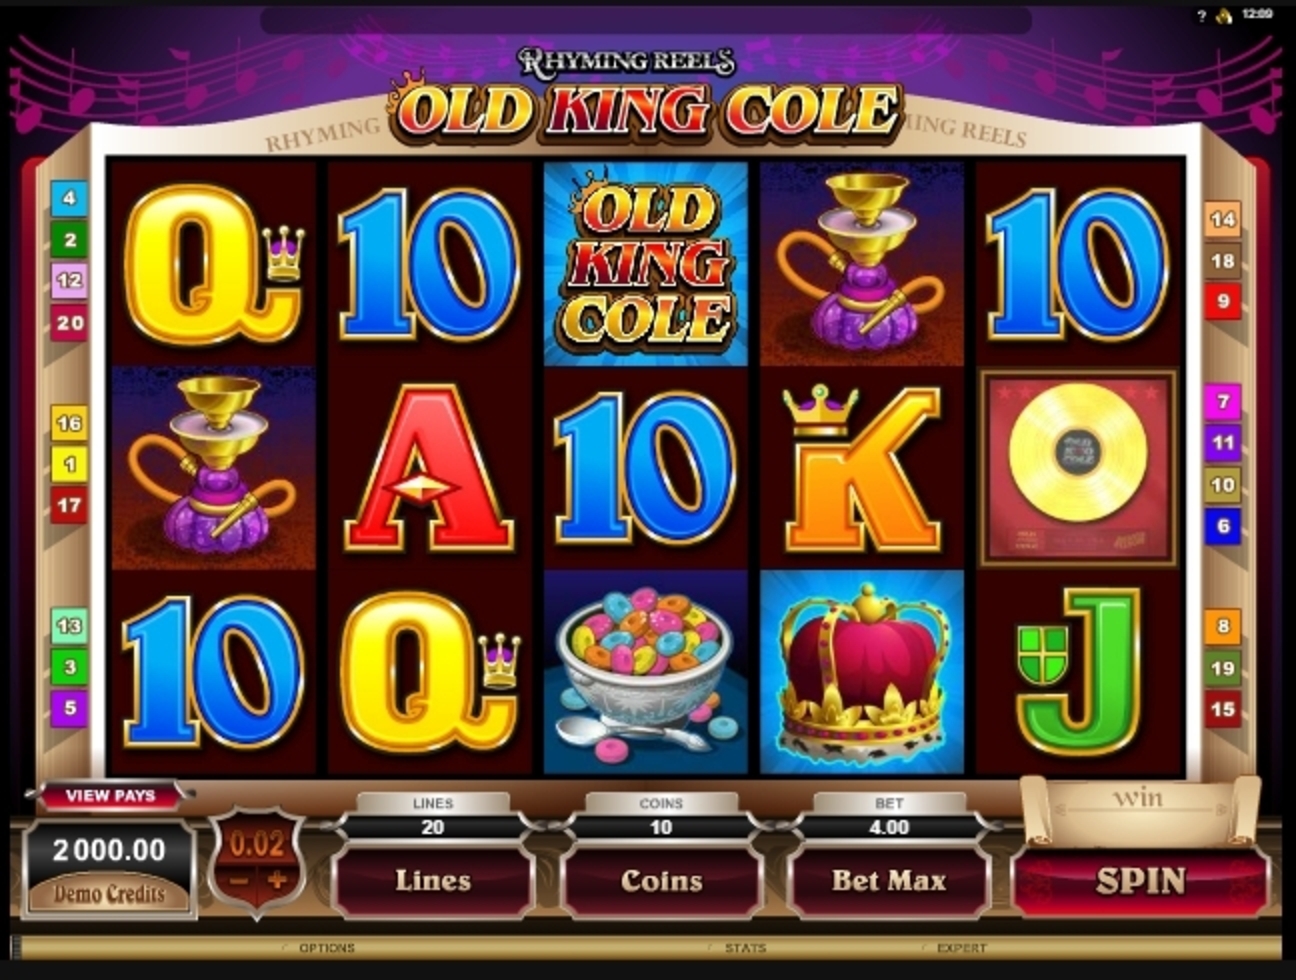 Reels in Old King Cole Slot Game by Microgaming